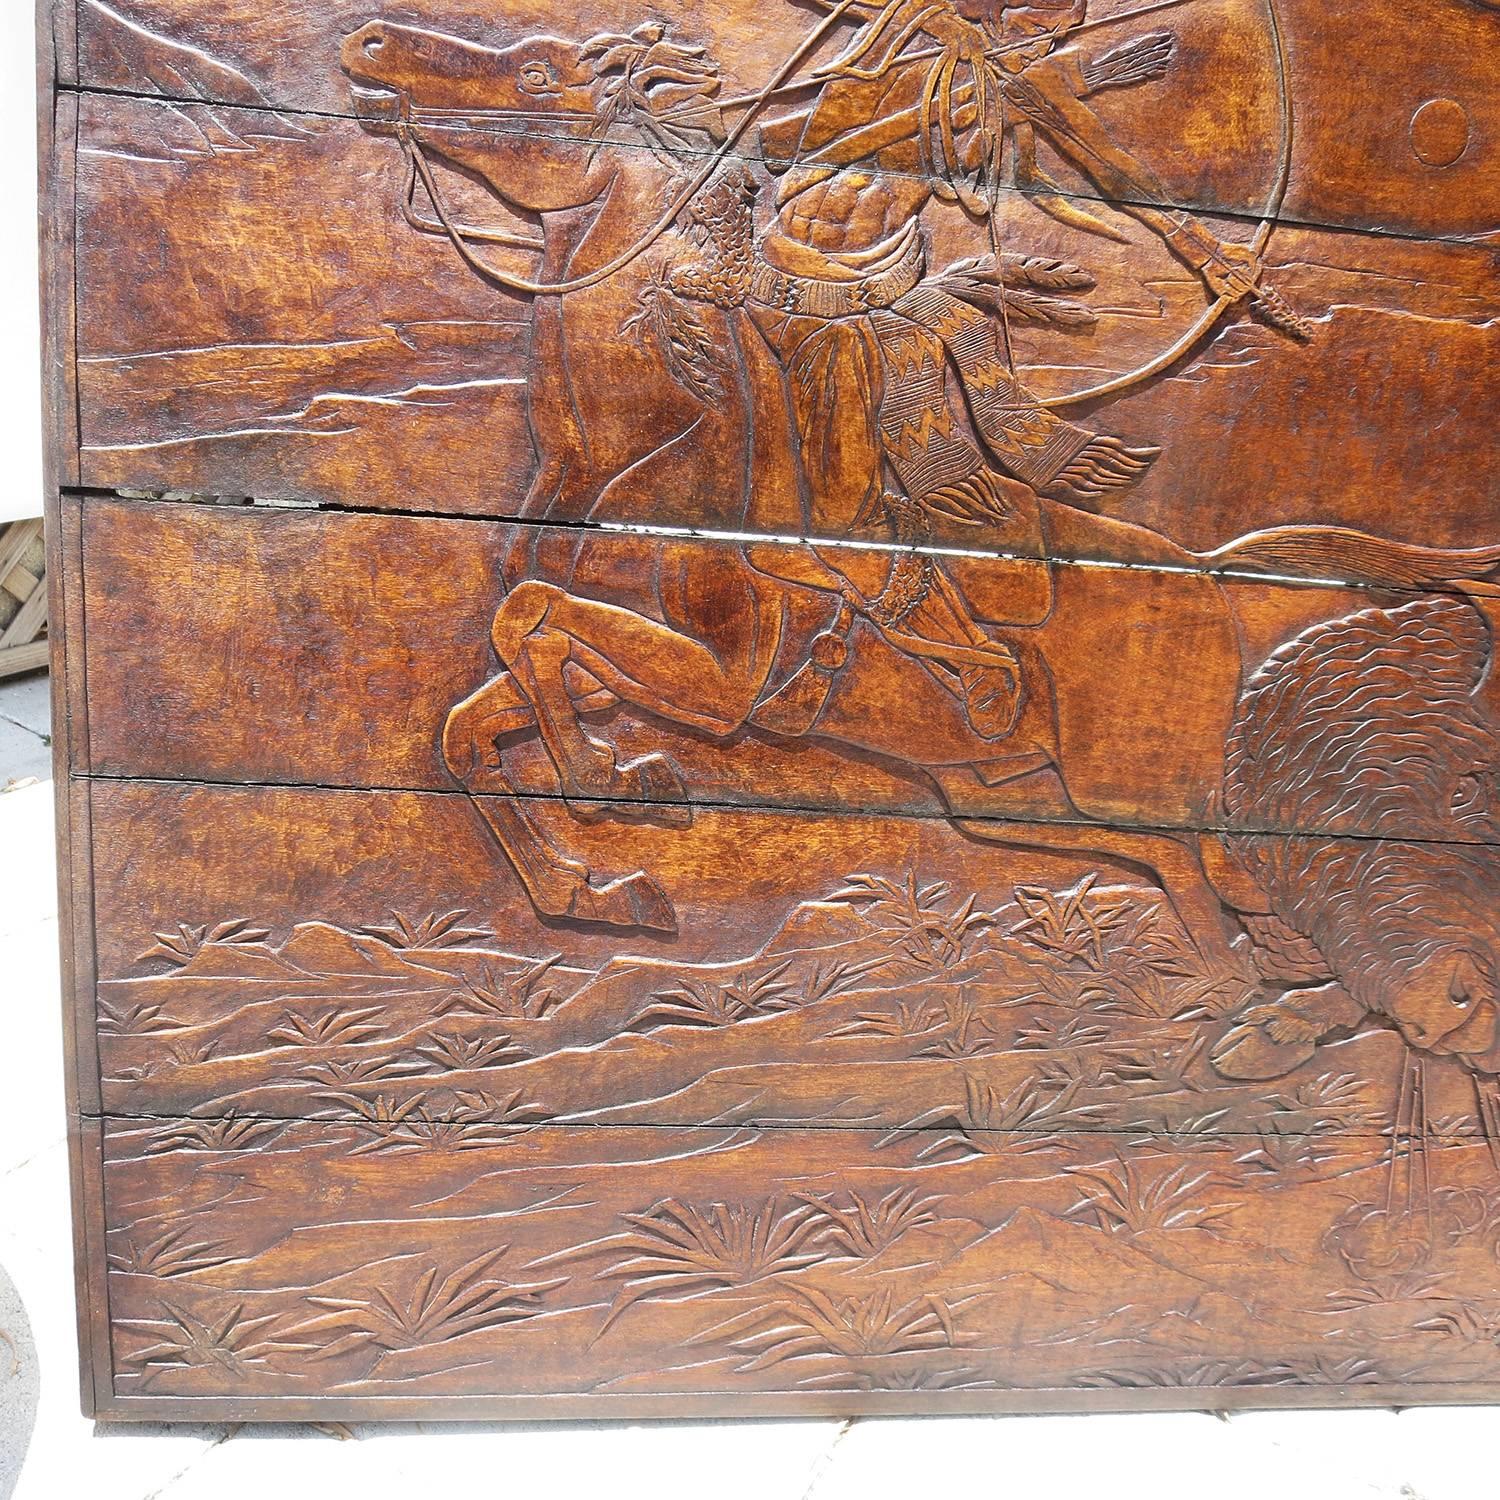 Native American Native Hunting Buffalo Carved Wooden Wall Panel Art by Leanora Oliver Nunn